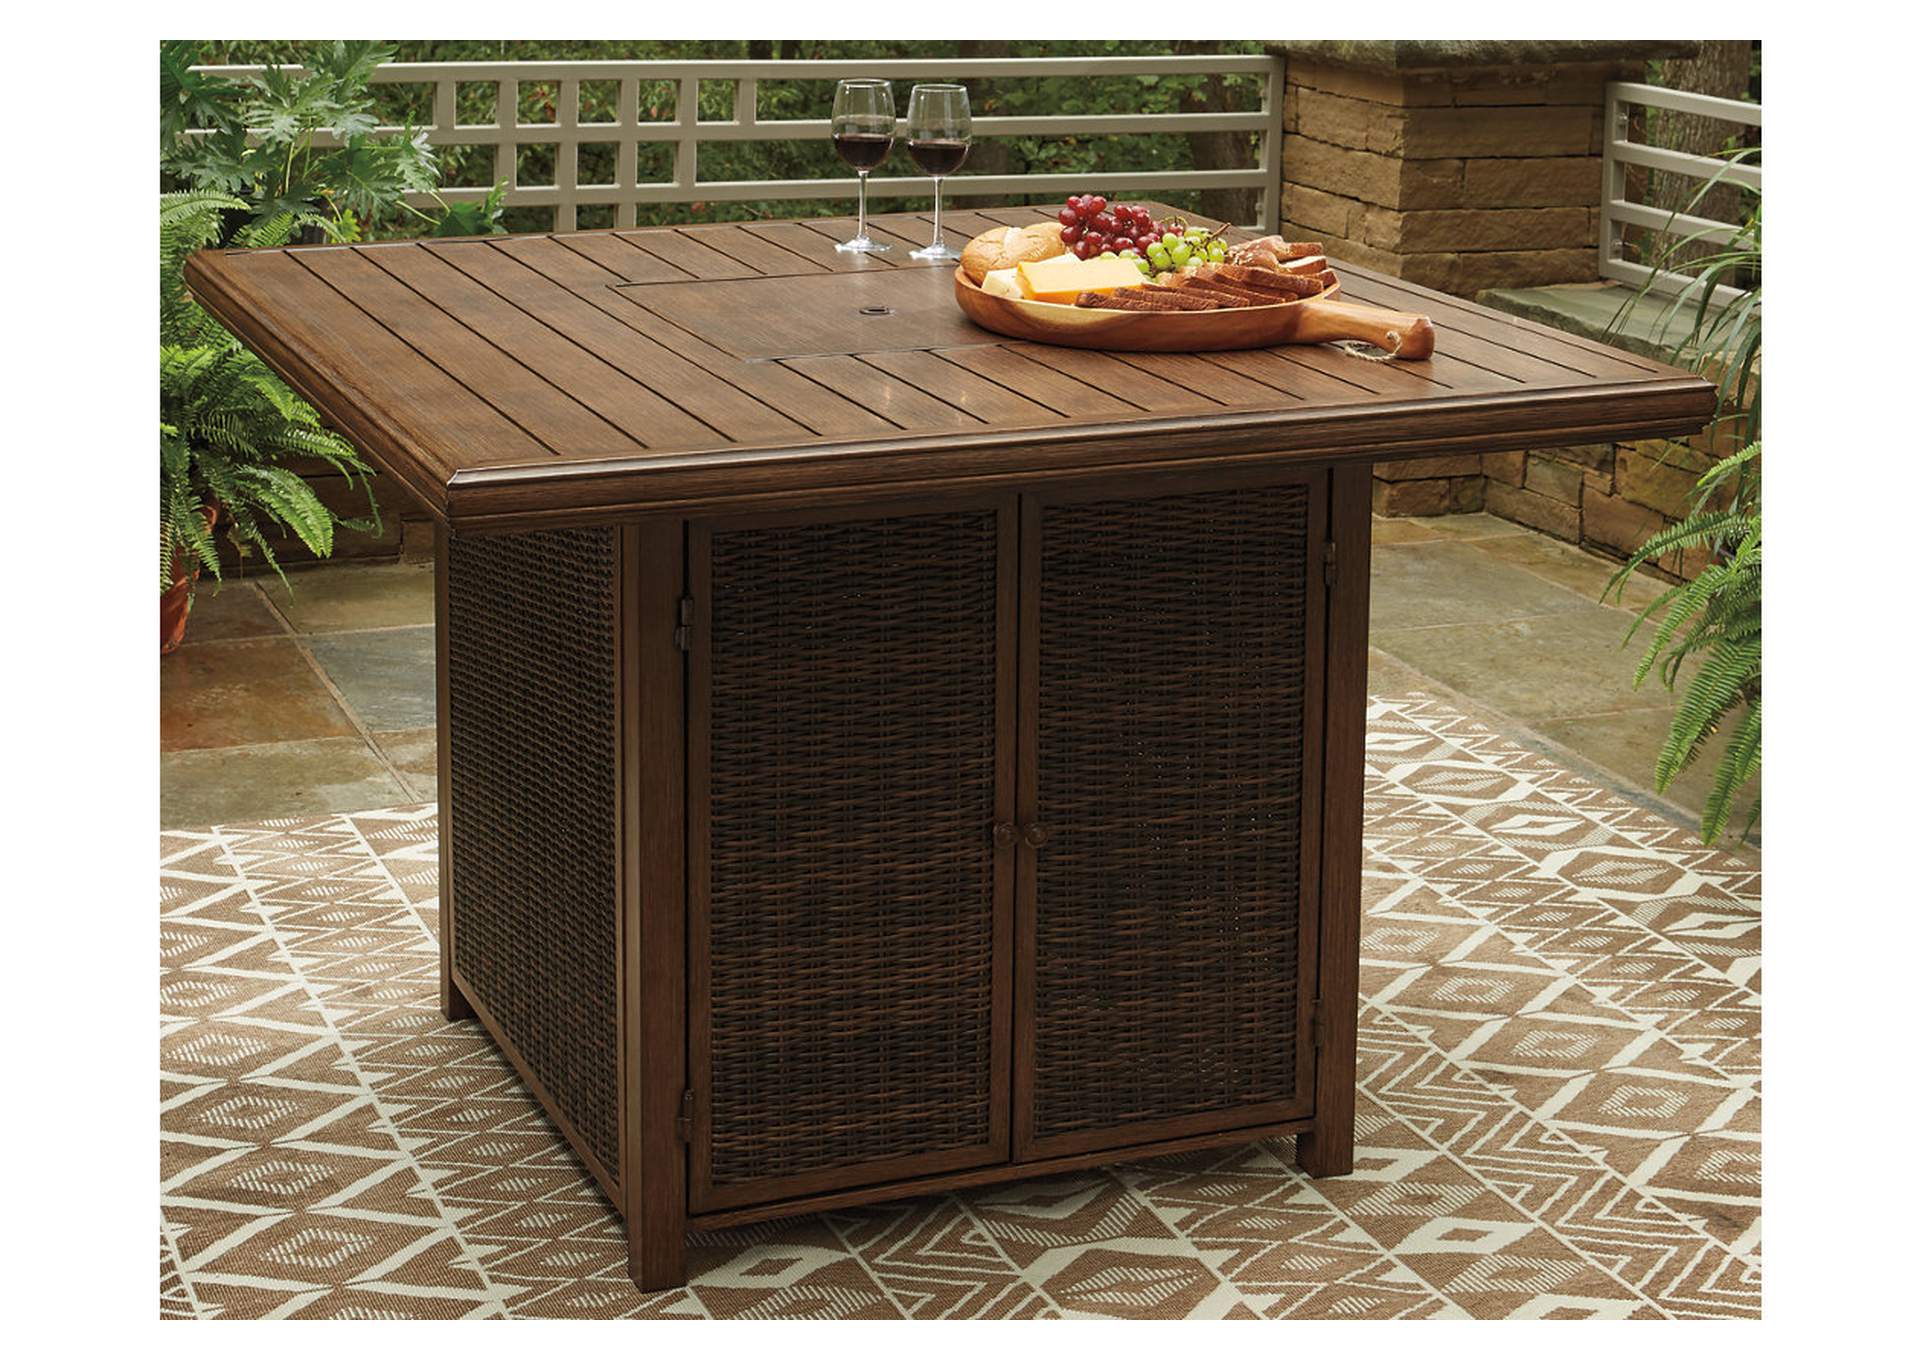 Paradise Trail Bar Table with Fire Pit,Outdoor By Ashley